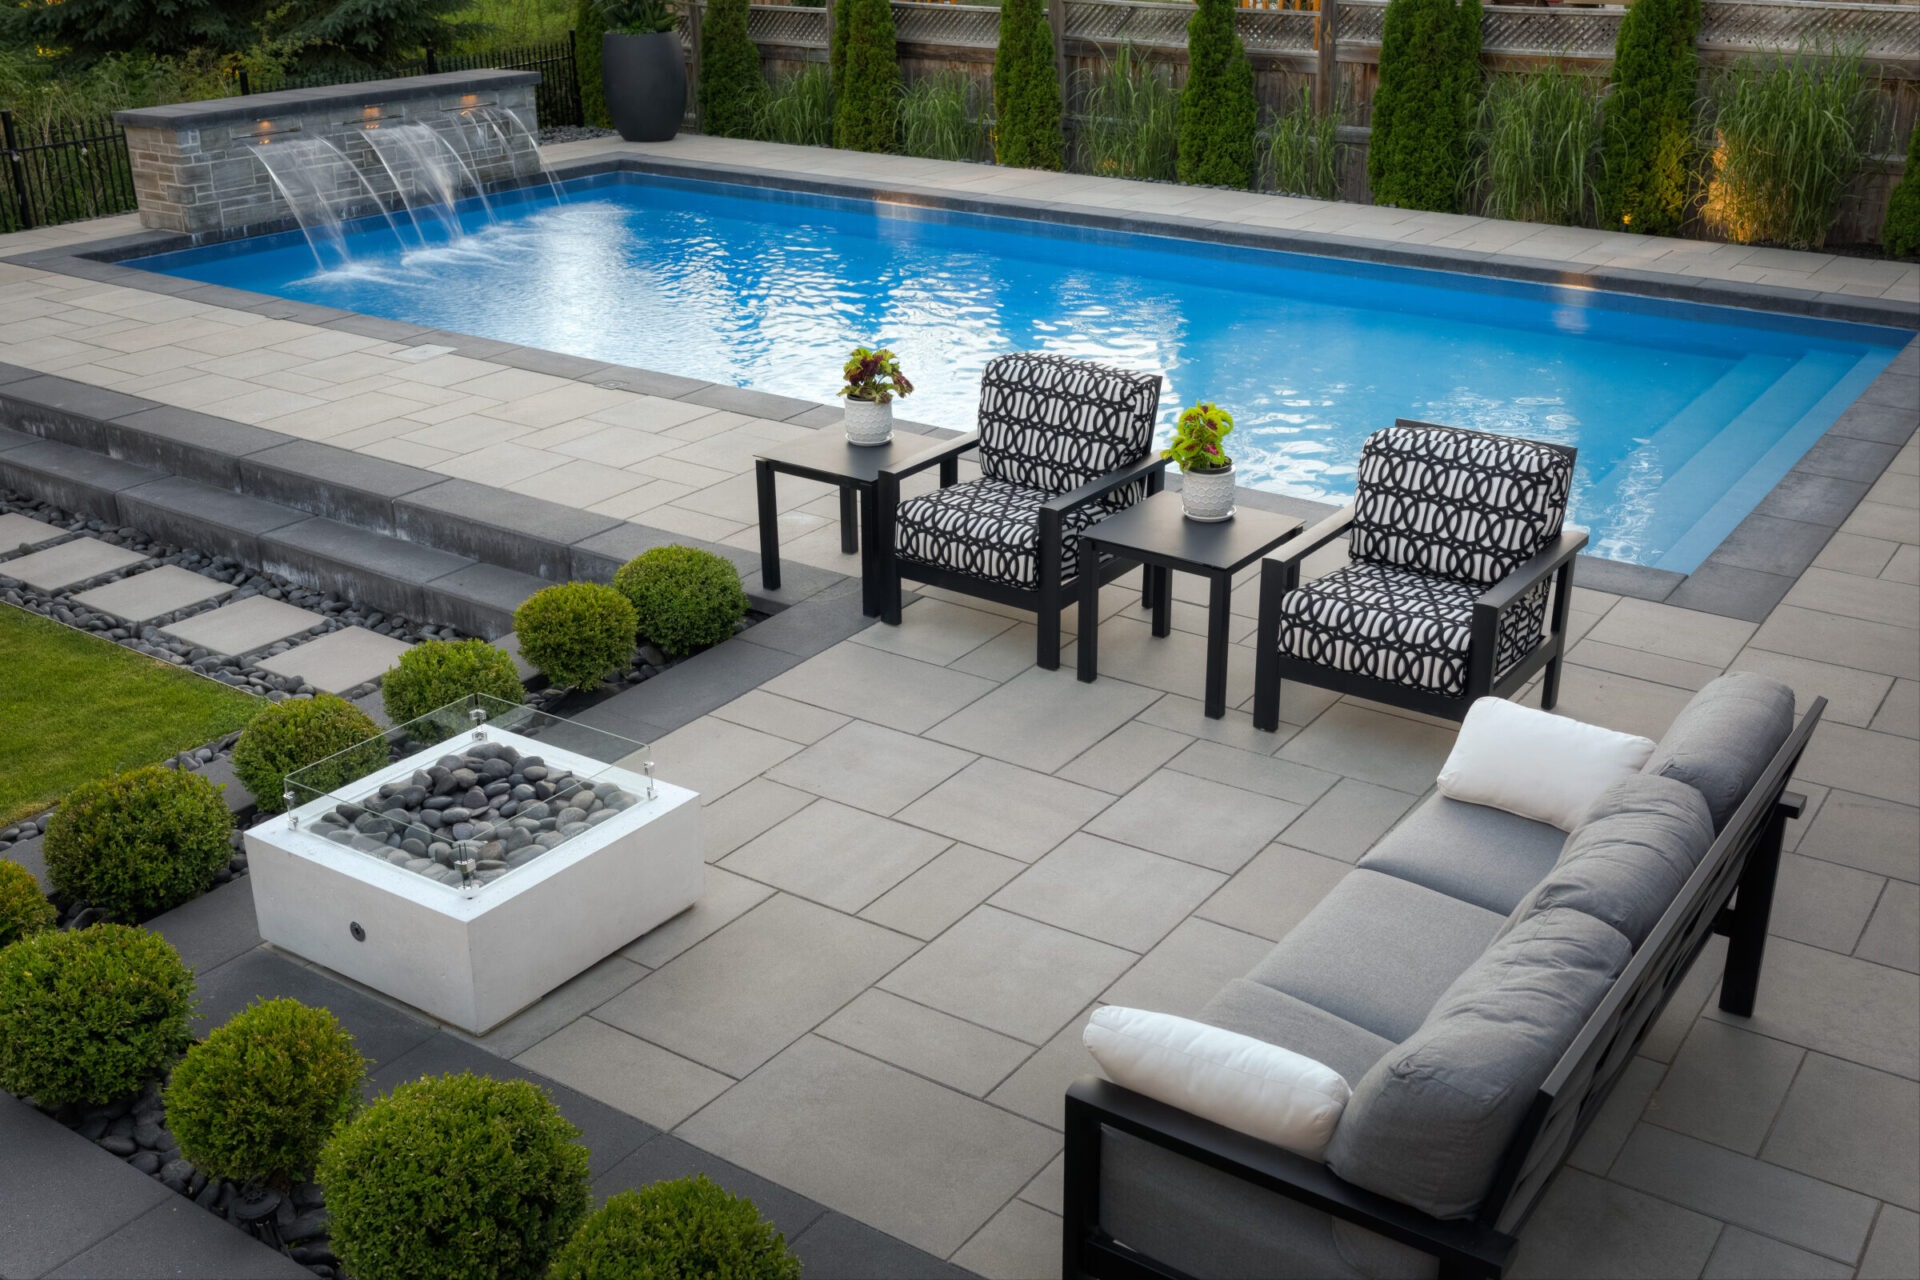 This image shows a modern backyard patio with well-manicured grass, a rectangular inground pool, stylish outdoor furniture, decorative plants, and a water feature.